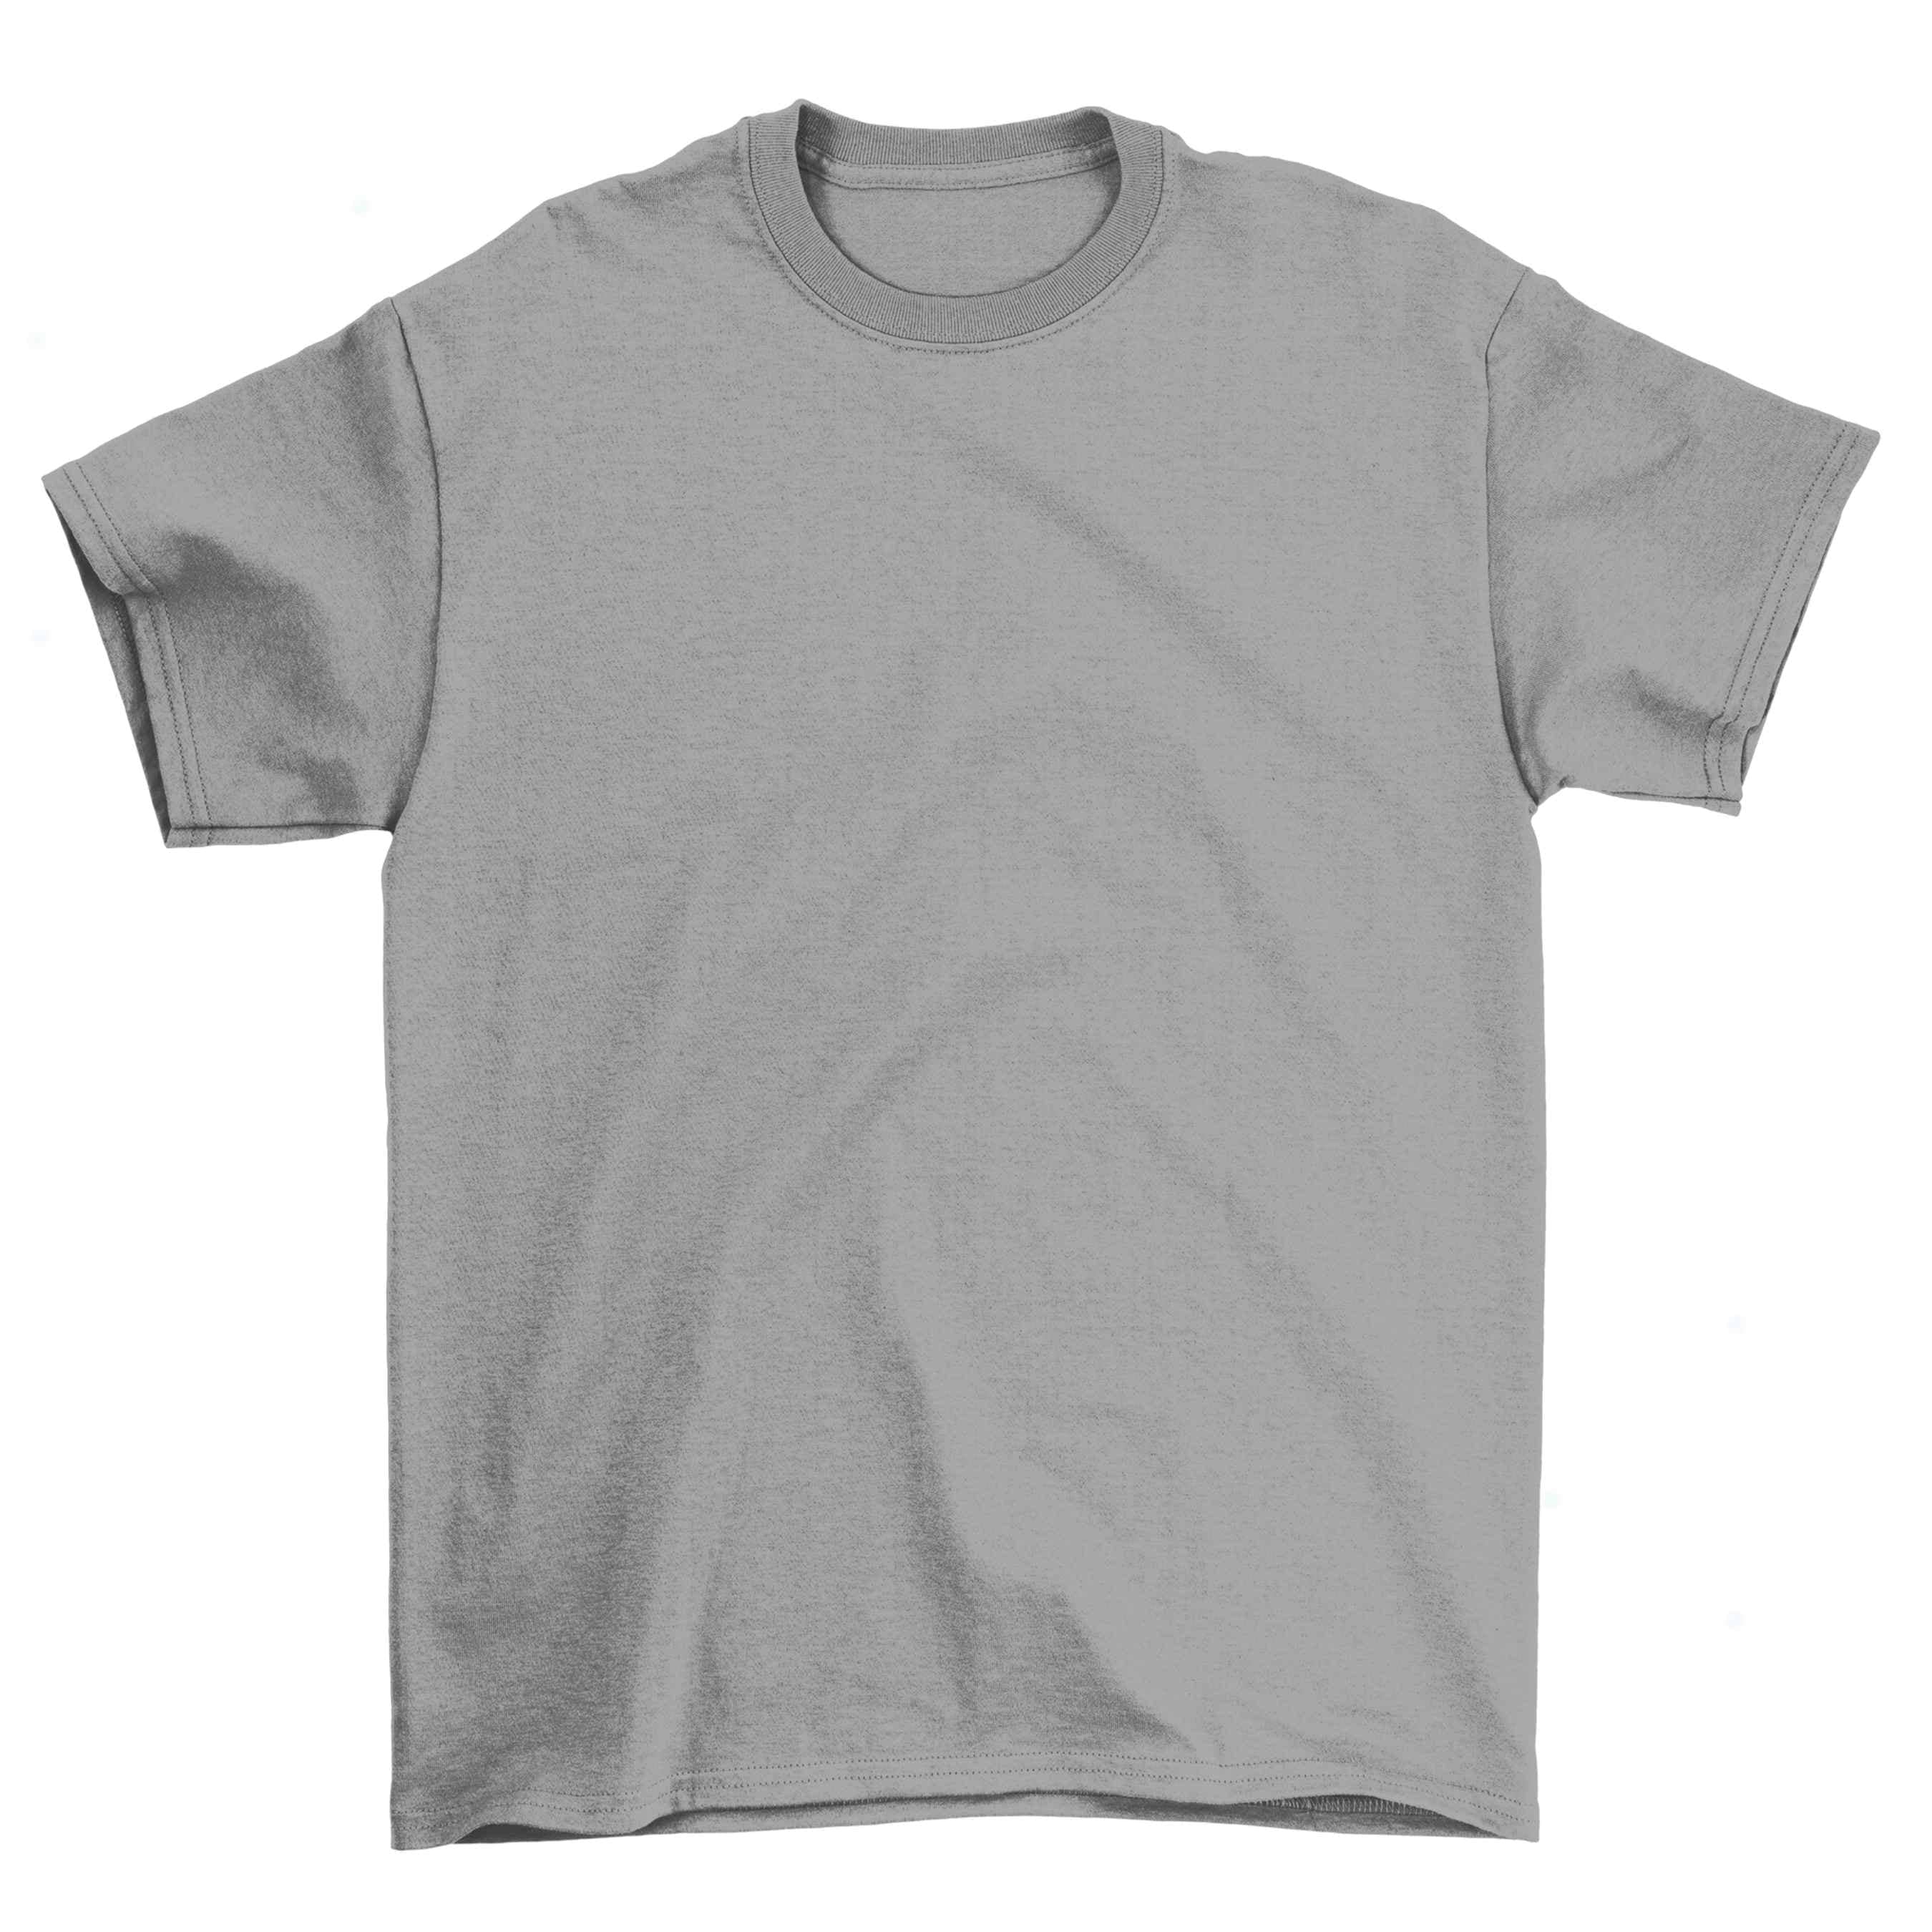 Classic Tees for Men - Classic Tees for Women